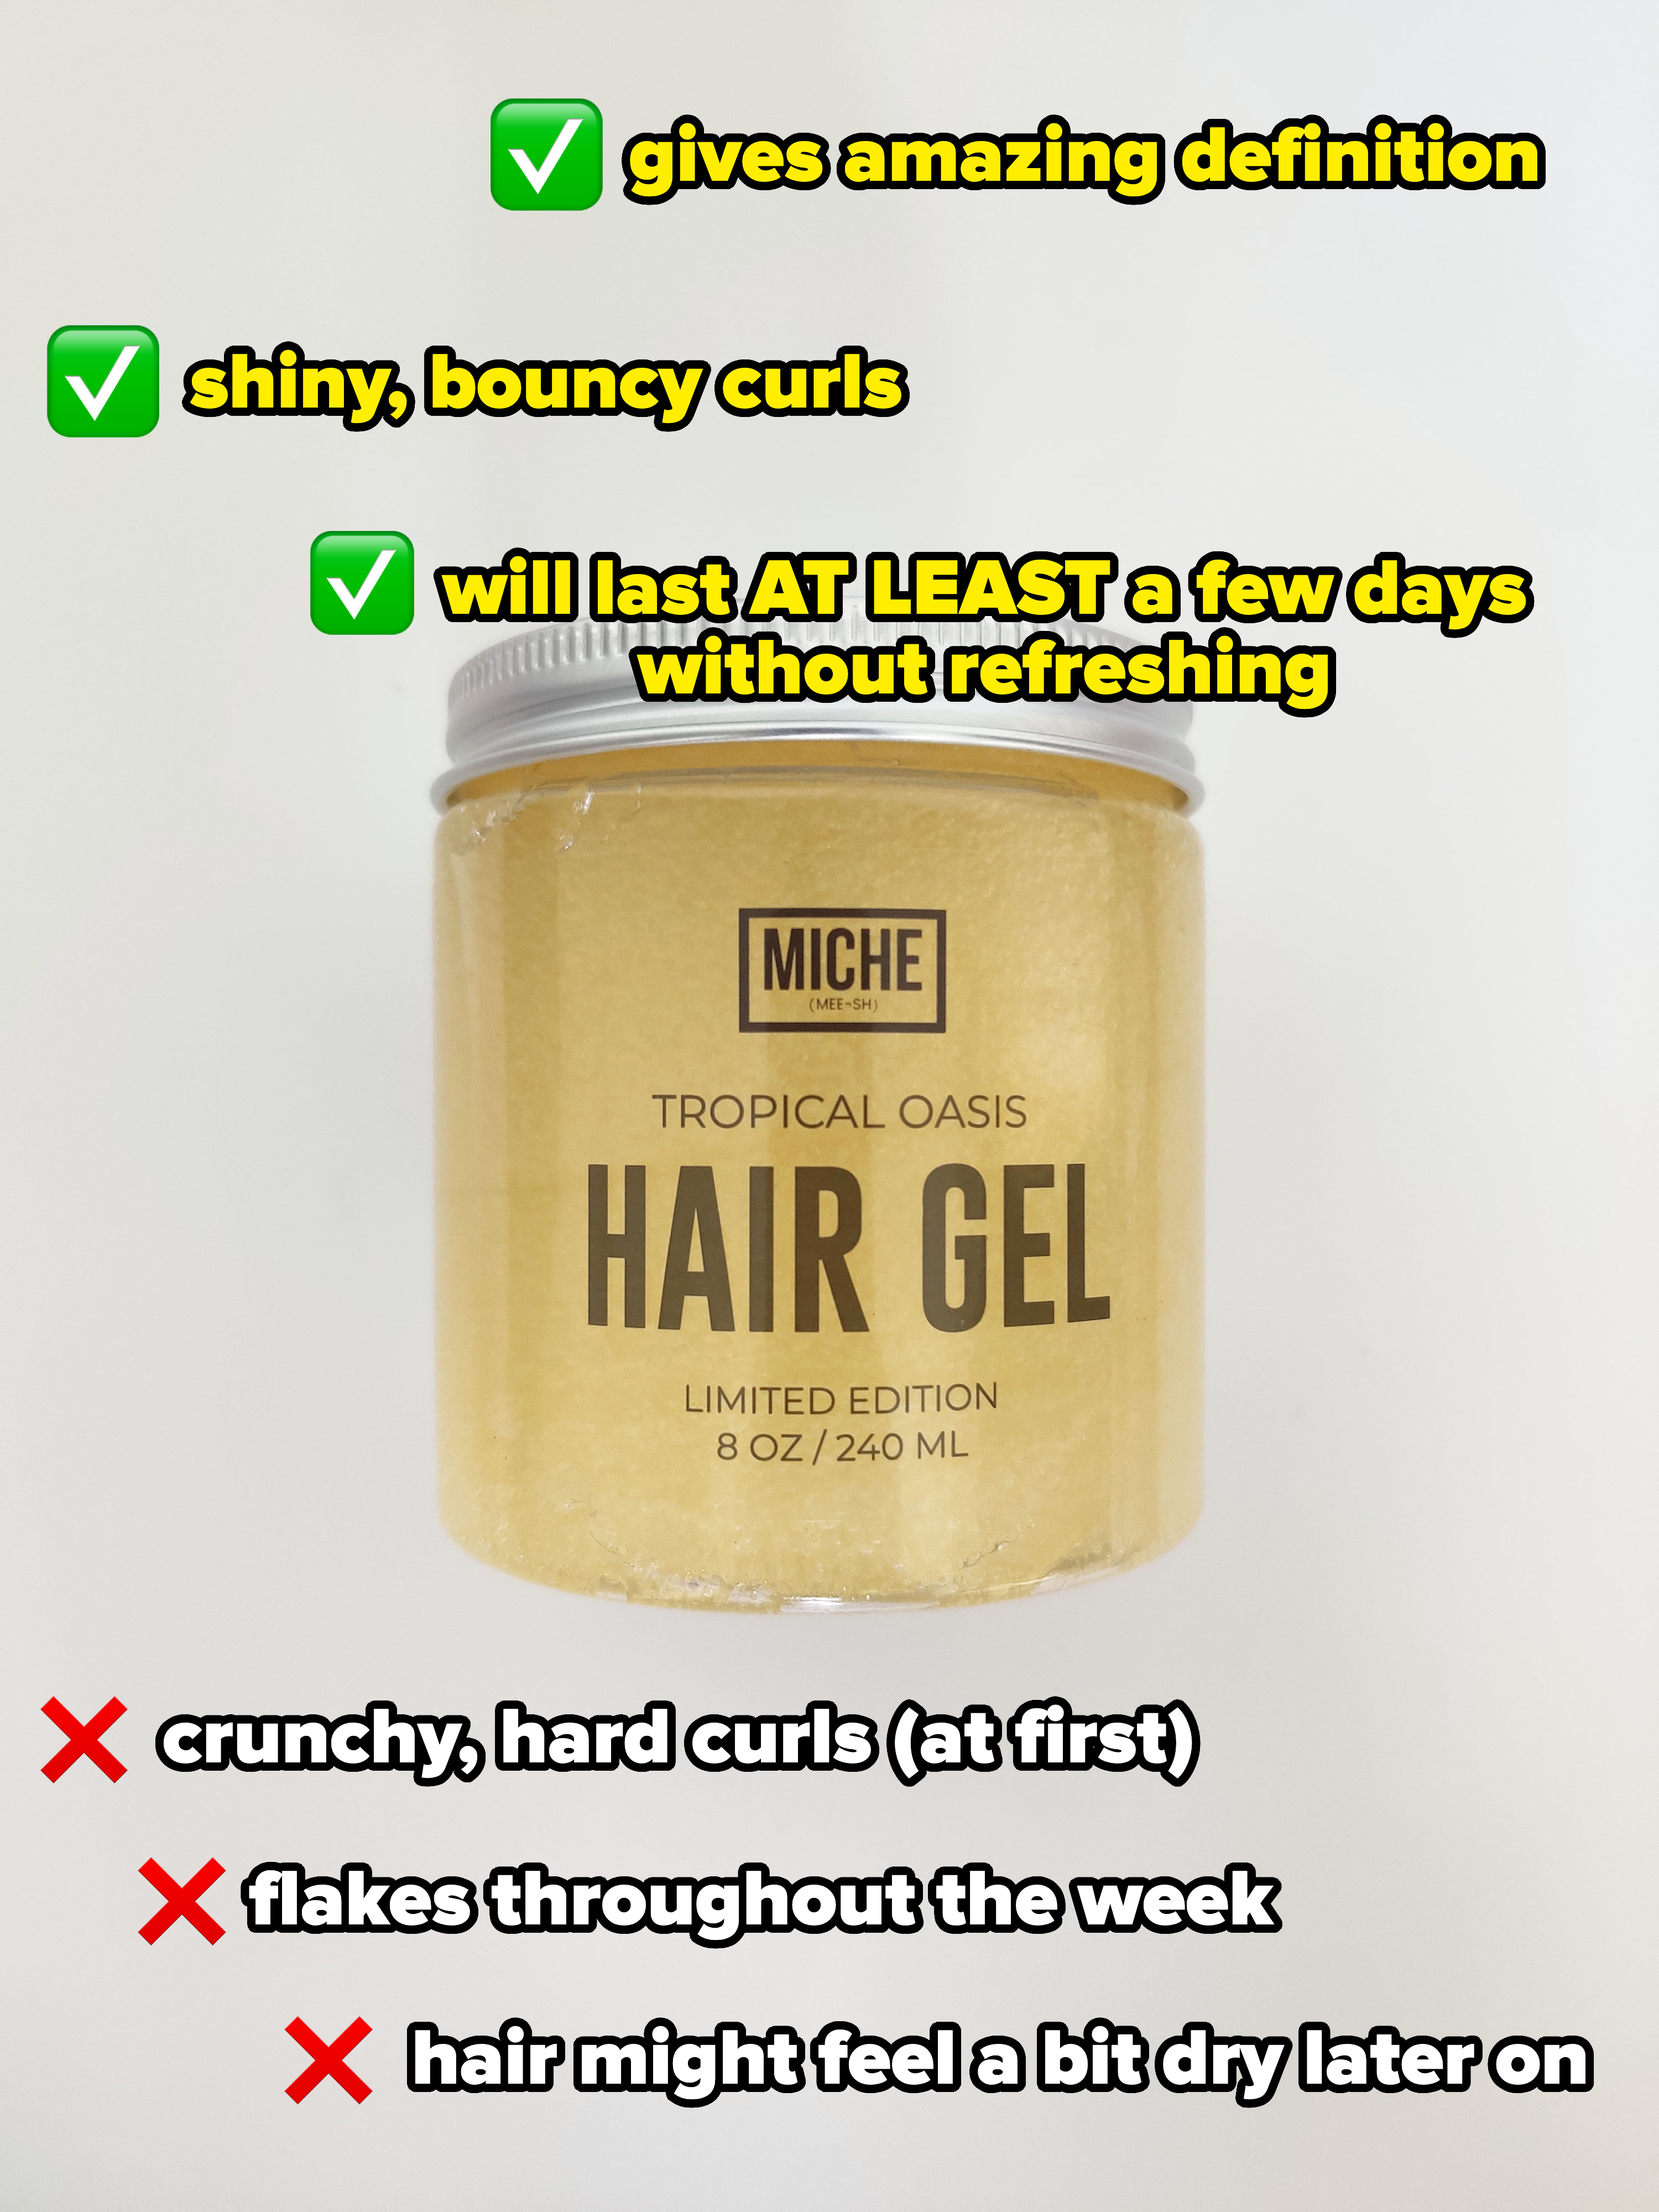 Jar of Miche Tropical Oasis Hair Gel with a list of pros: gives amazing definition, shiny, bouncy curls, will last at least a few days without refreshing; and cons: crunchy, hard curls at first, might flake throughout the week